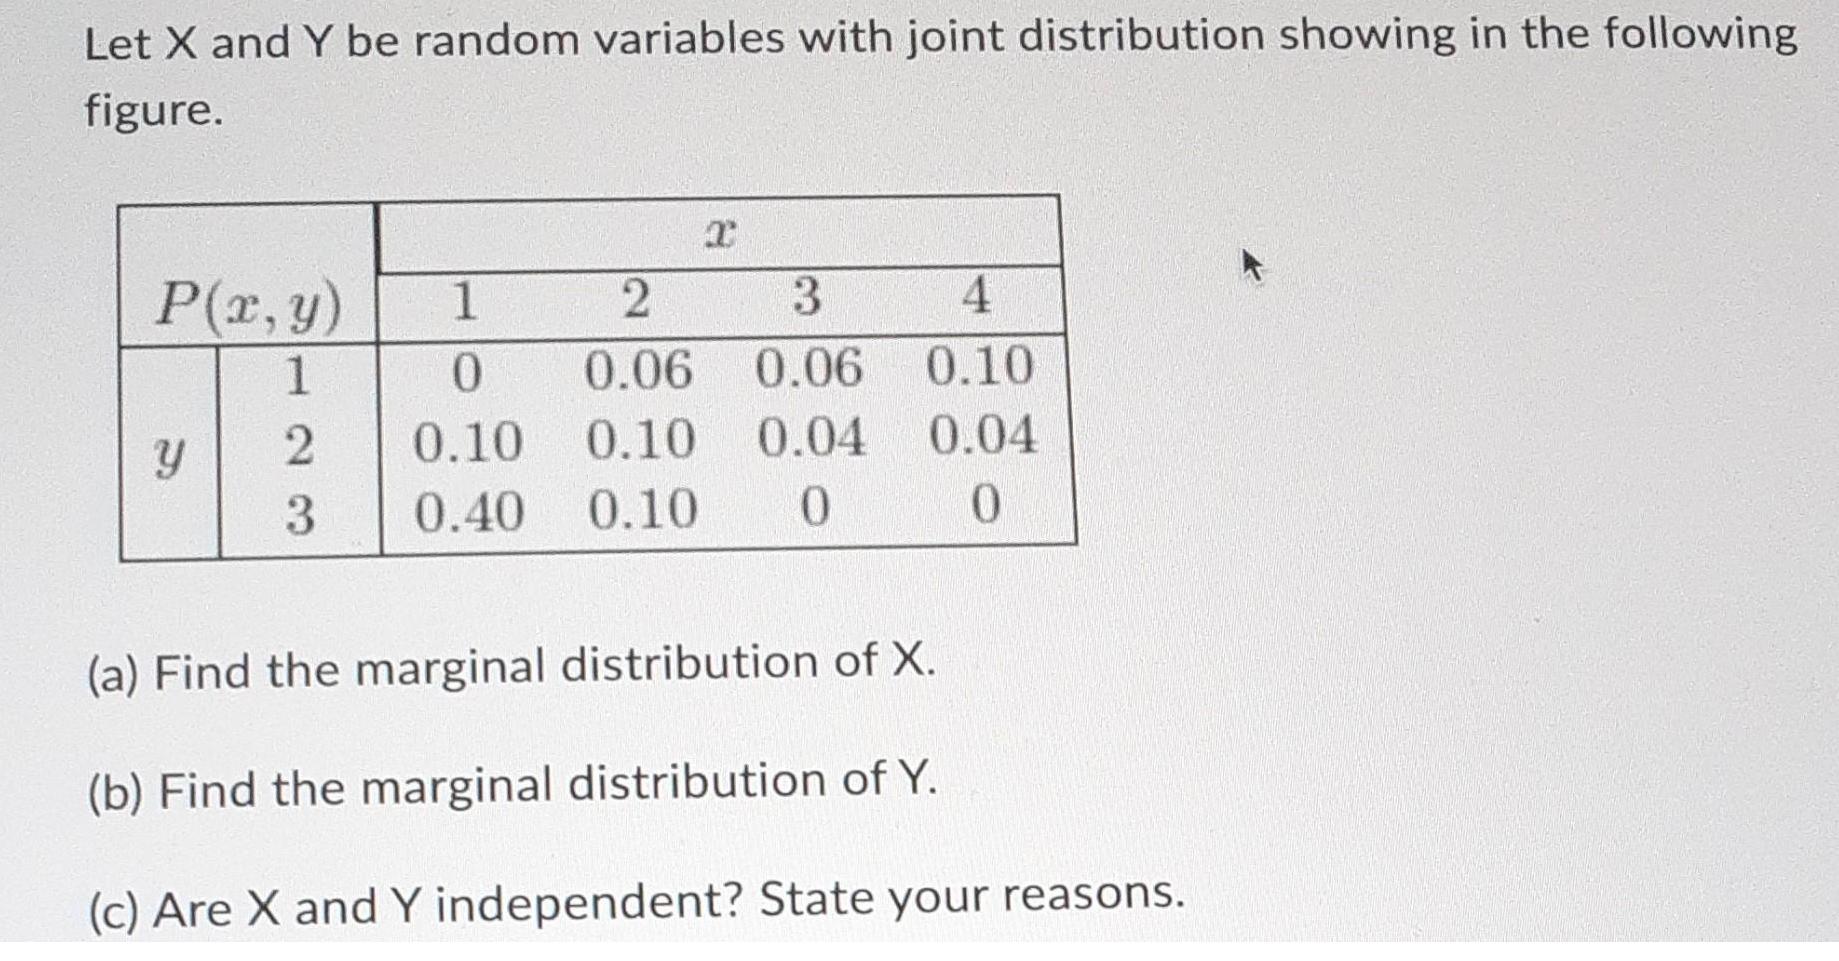 Let X and Y be random variables with joint distribution showing in the following figure. P(x, y) 1 1 0 2 0.10